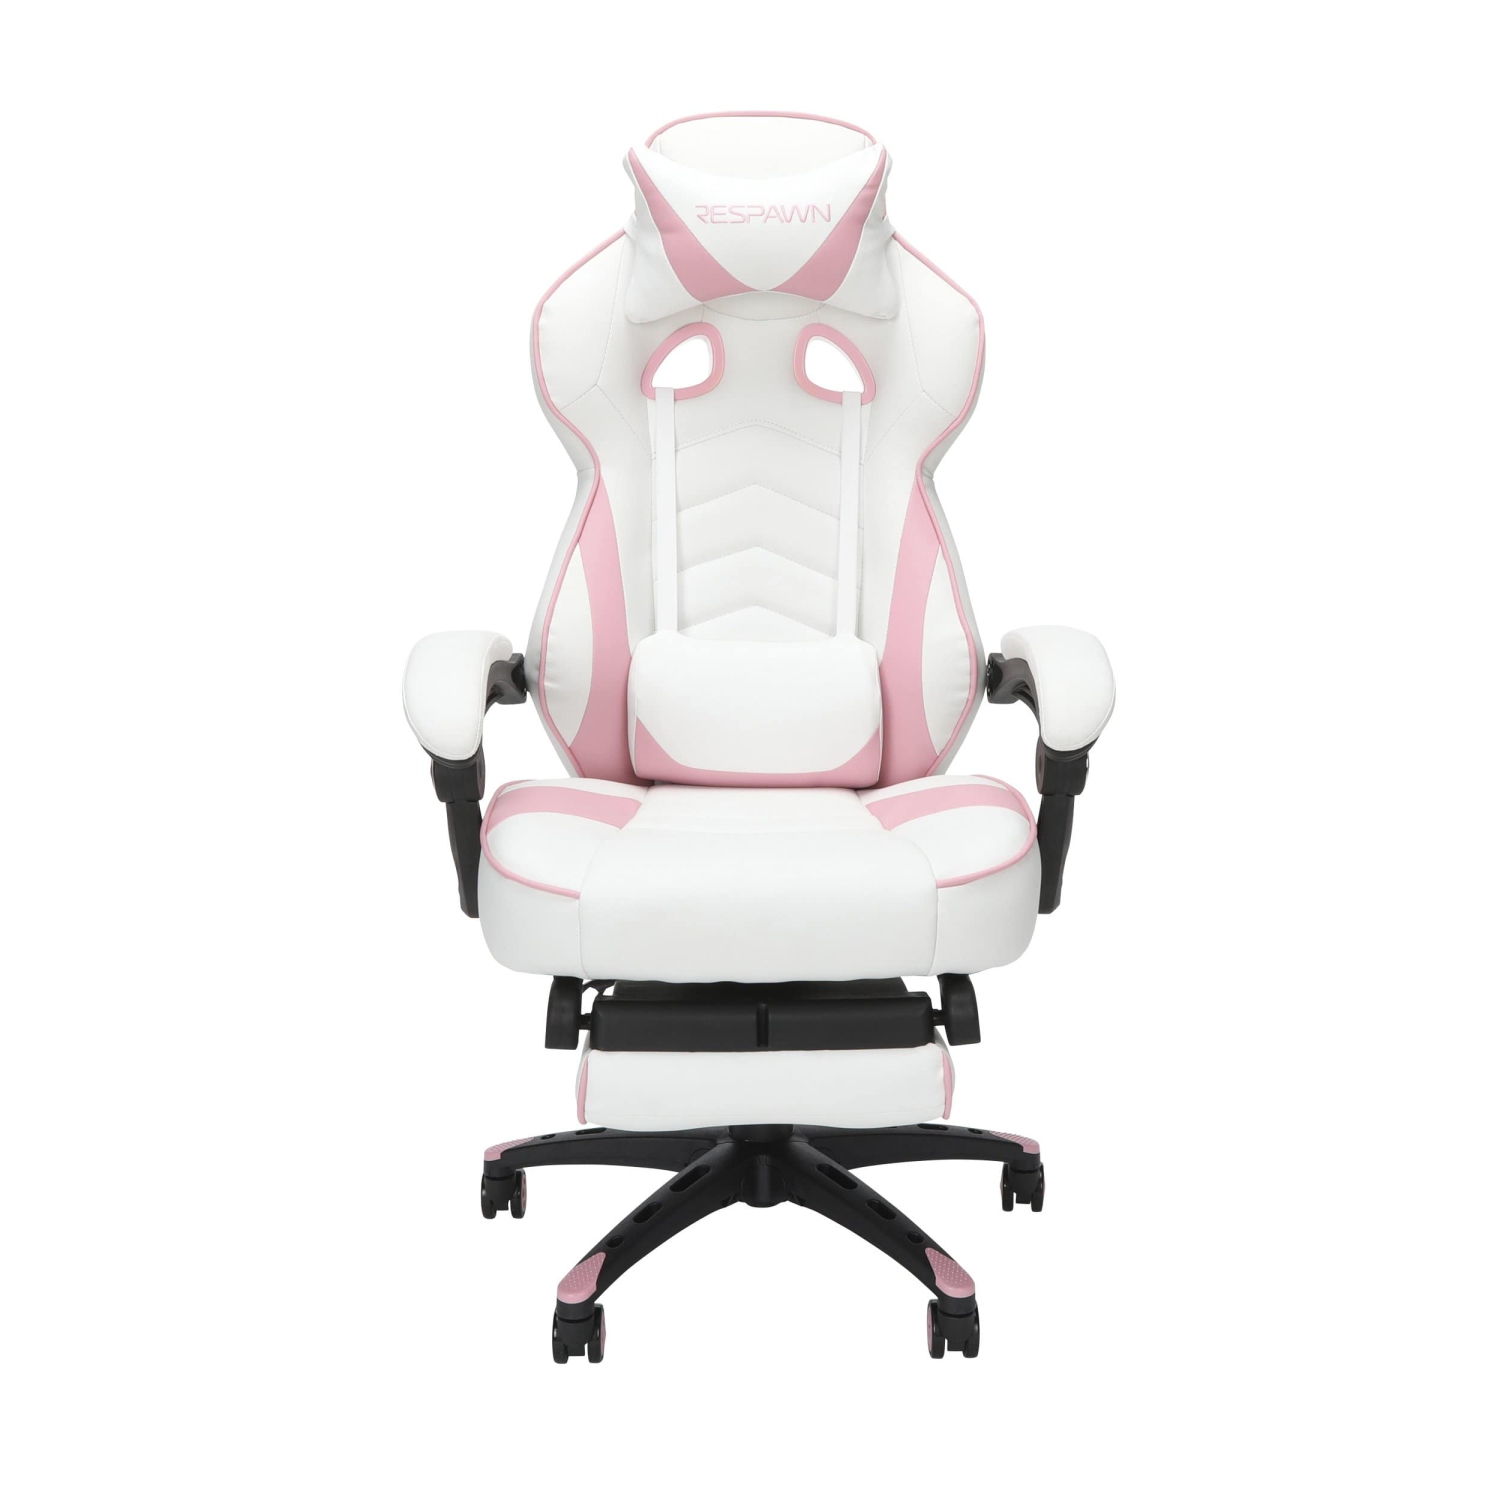 Respawn 110 Racing Style Gaming Chair Reclining Ergonomic Leather Chair With Footrest In Pink Best Buy Canada